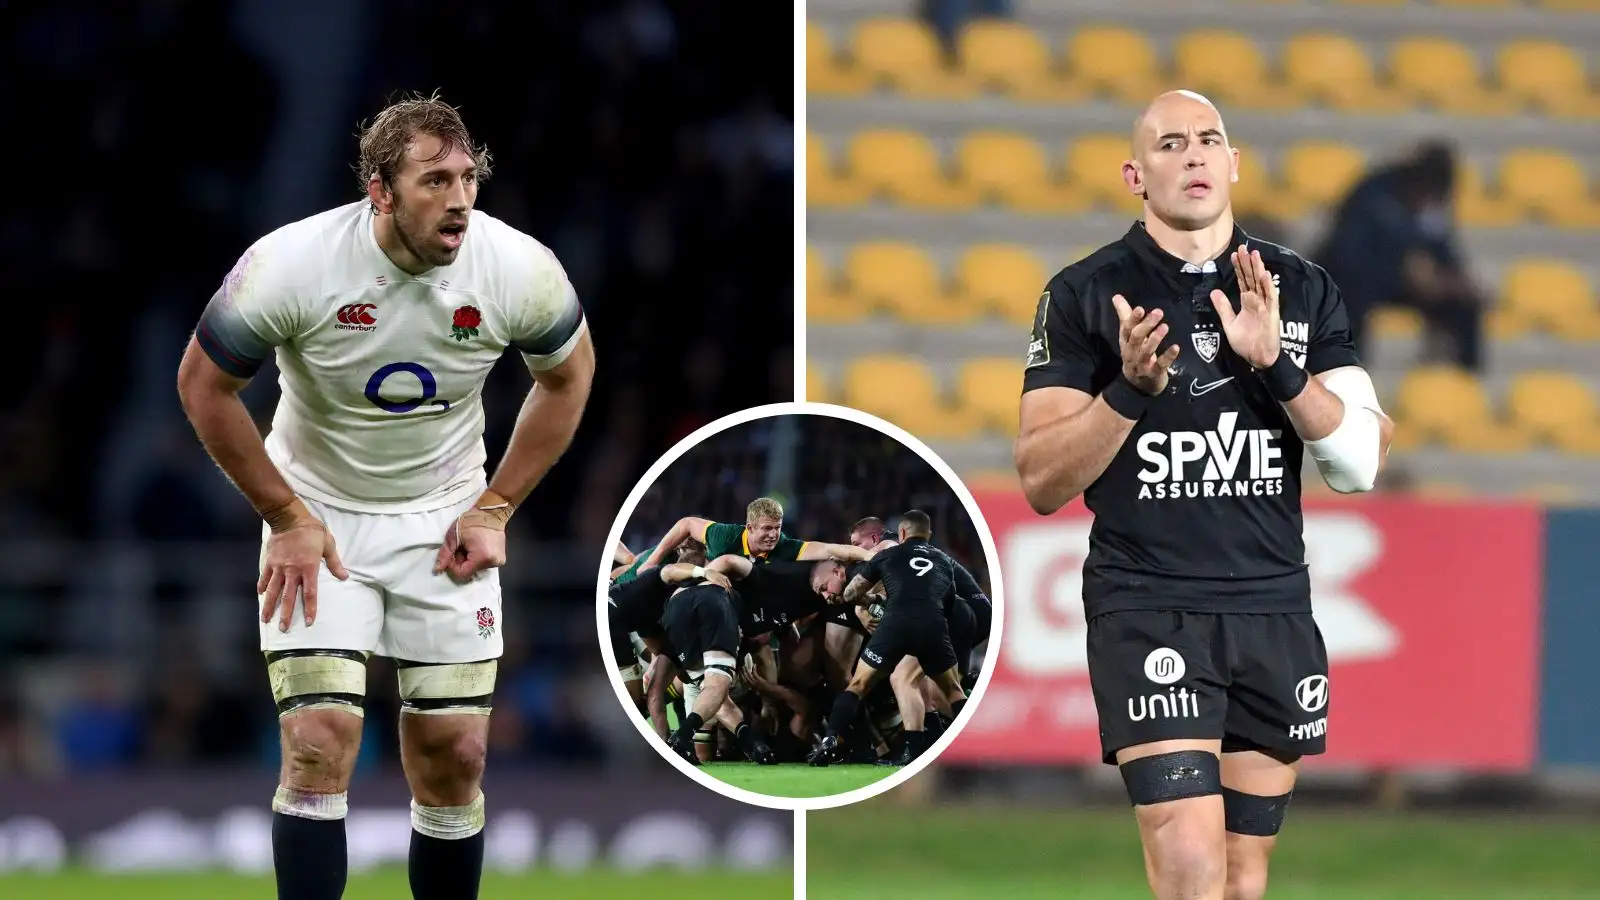 Former England captain Chris Robshaw and Italy skipper Sergio Parisse and a maul between the Springboks and All Blacks.